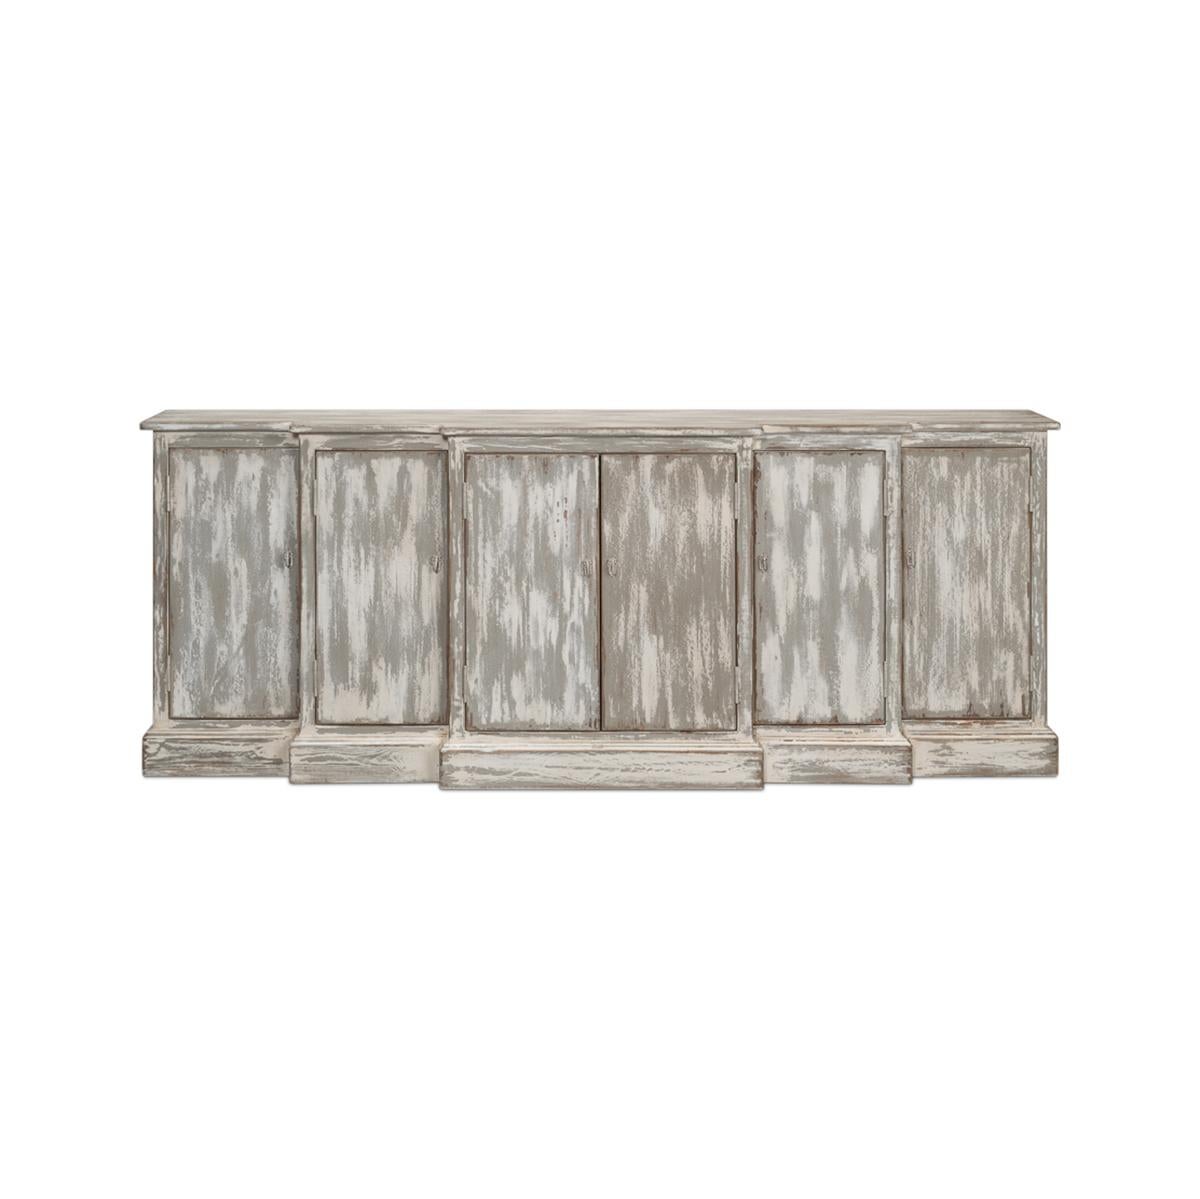 With a heavily distressed and antiqued painted finish. Grey and white color. Made of pine with six paneled doors with a waterfall step back breakfront design. The doors open to a painted interior with shelves. 

With antiqued hardware on a plinth